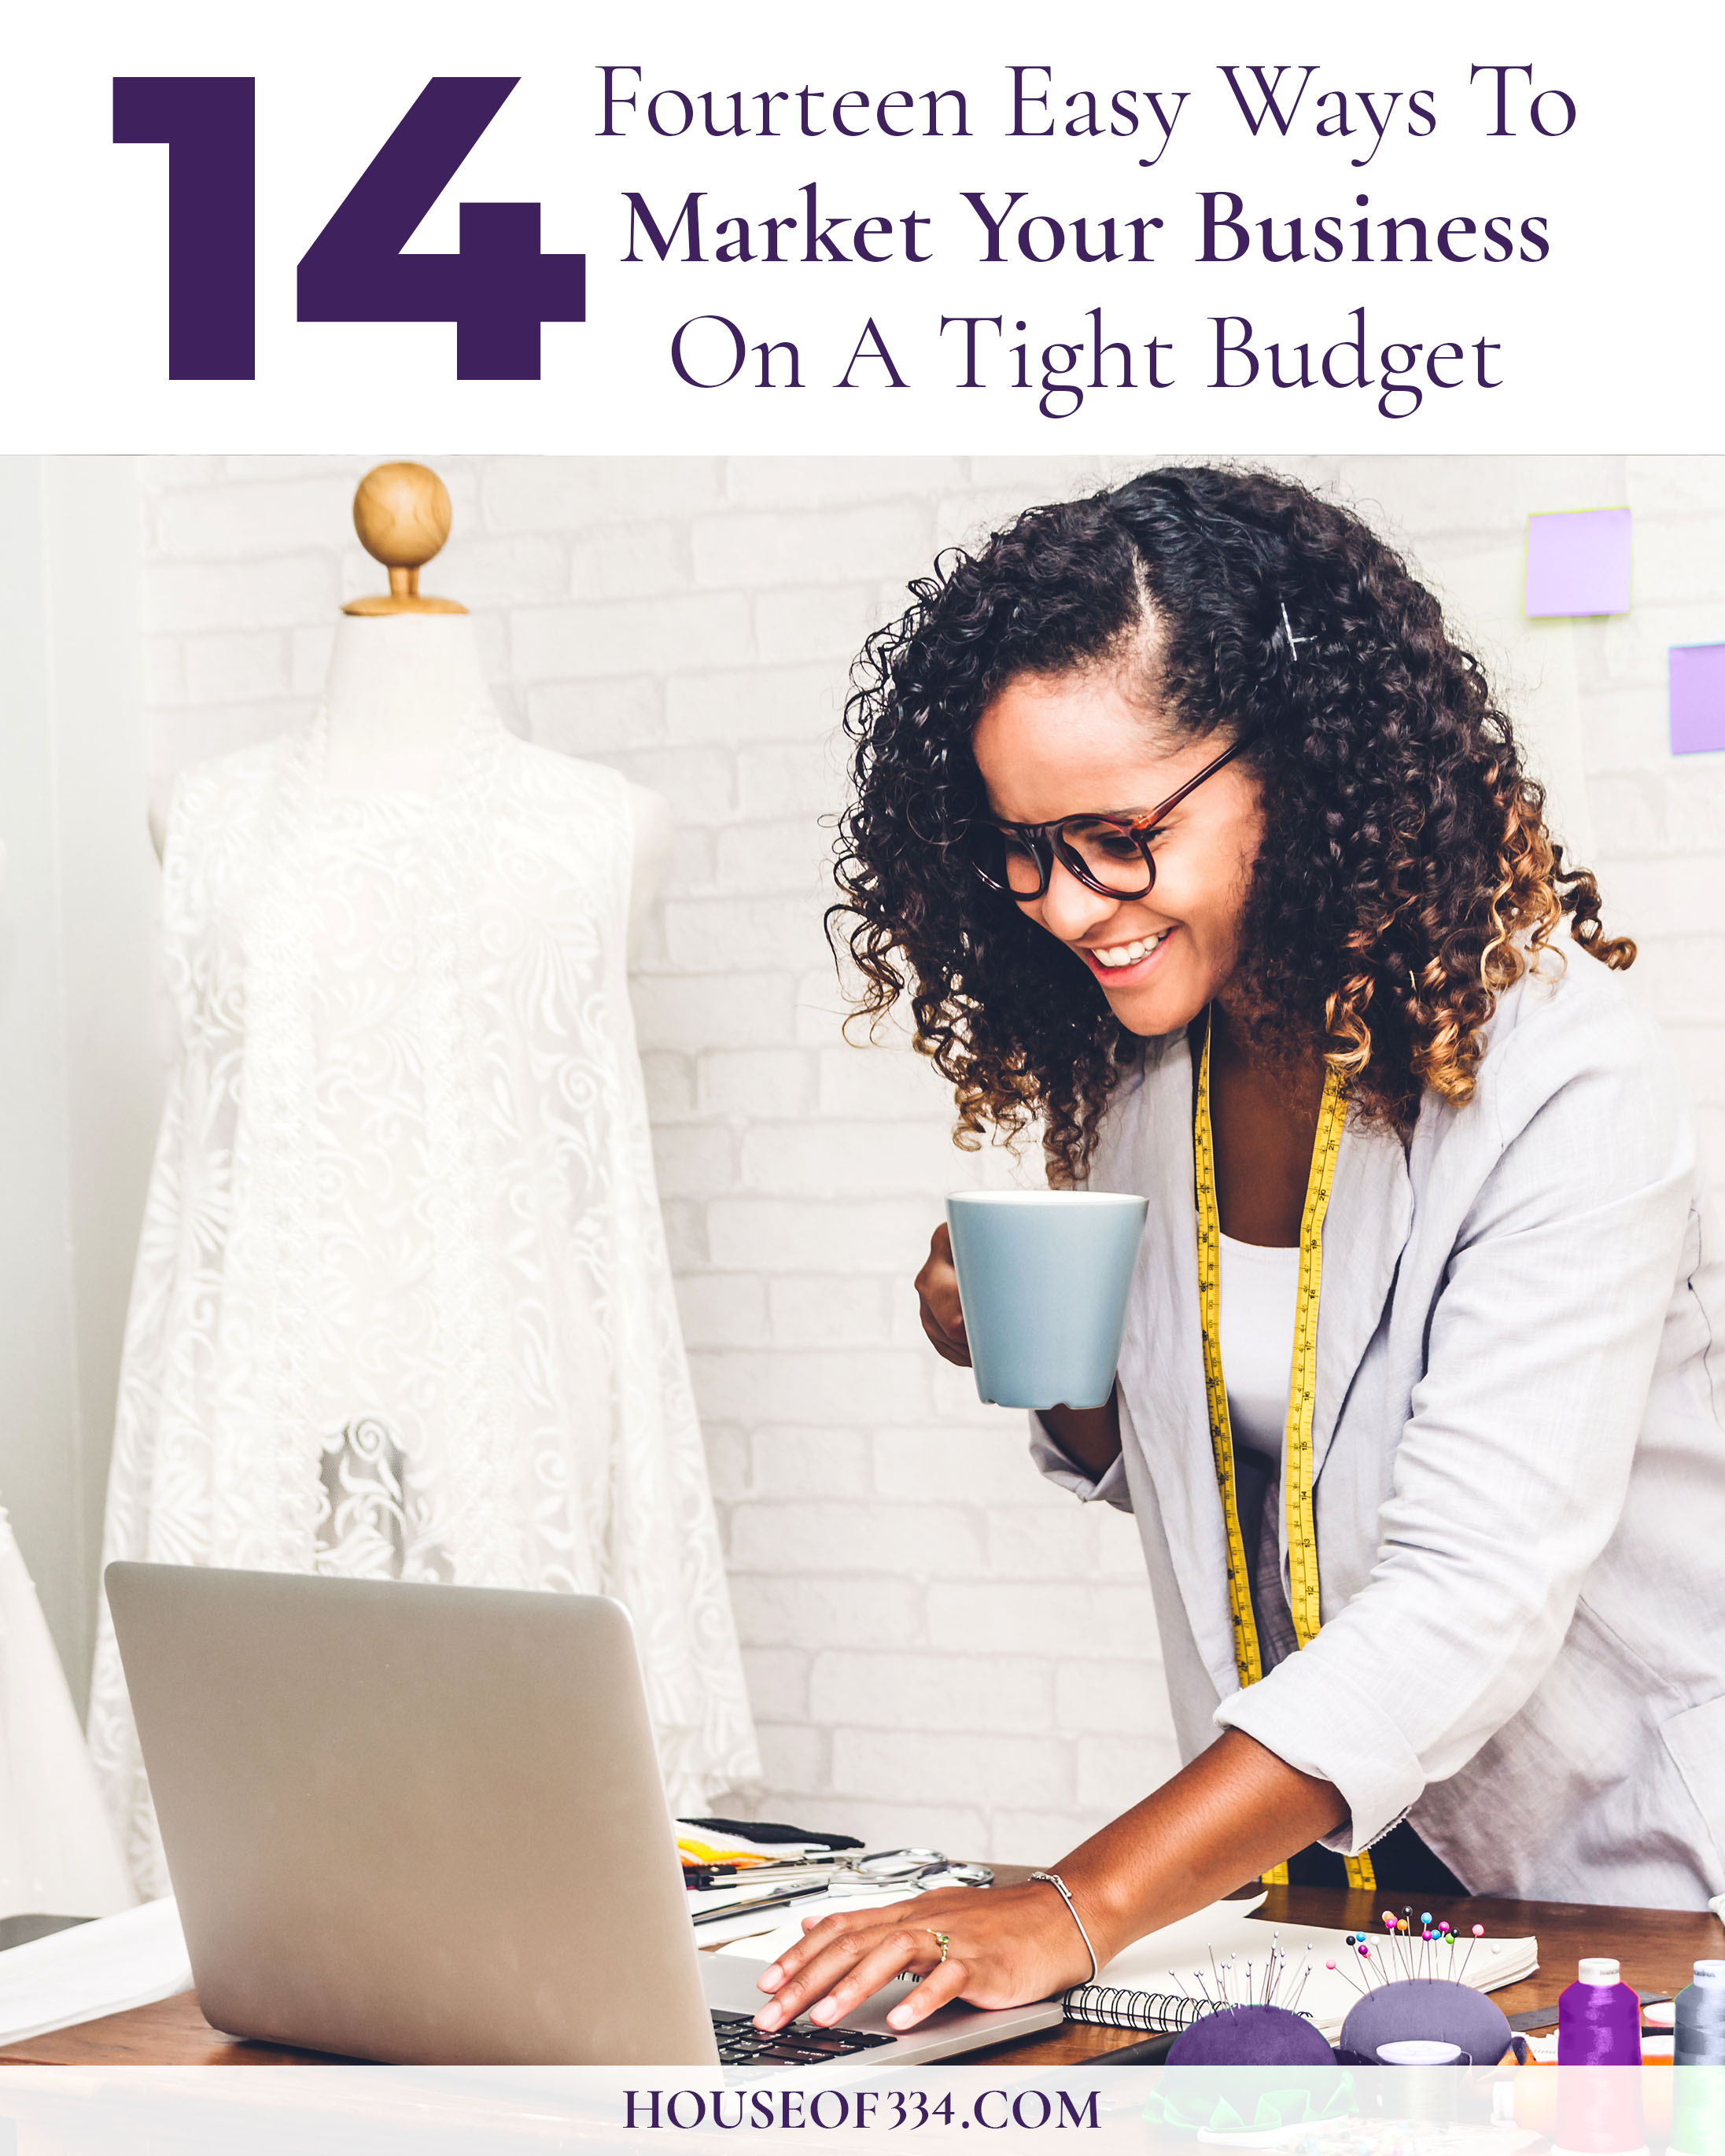 14 Easy Ways to Market Your Business on a Tight Budget